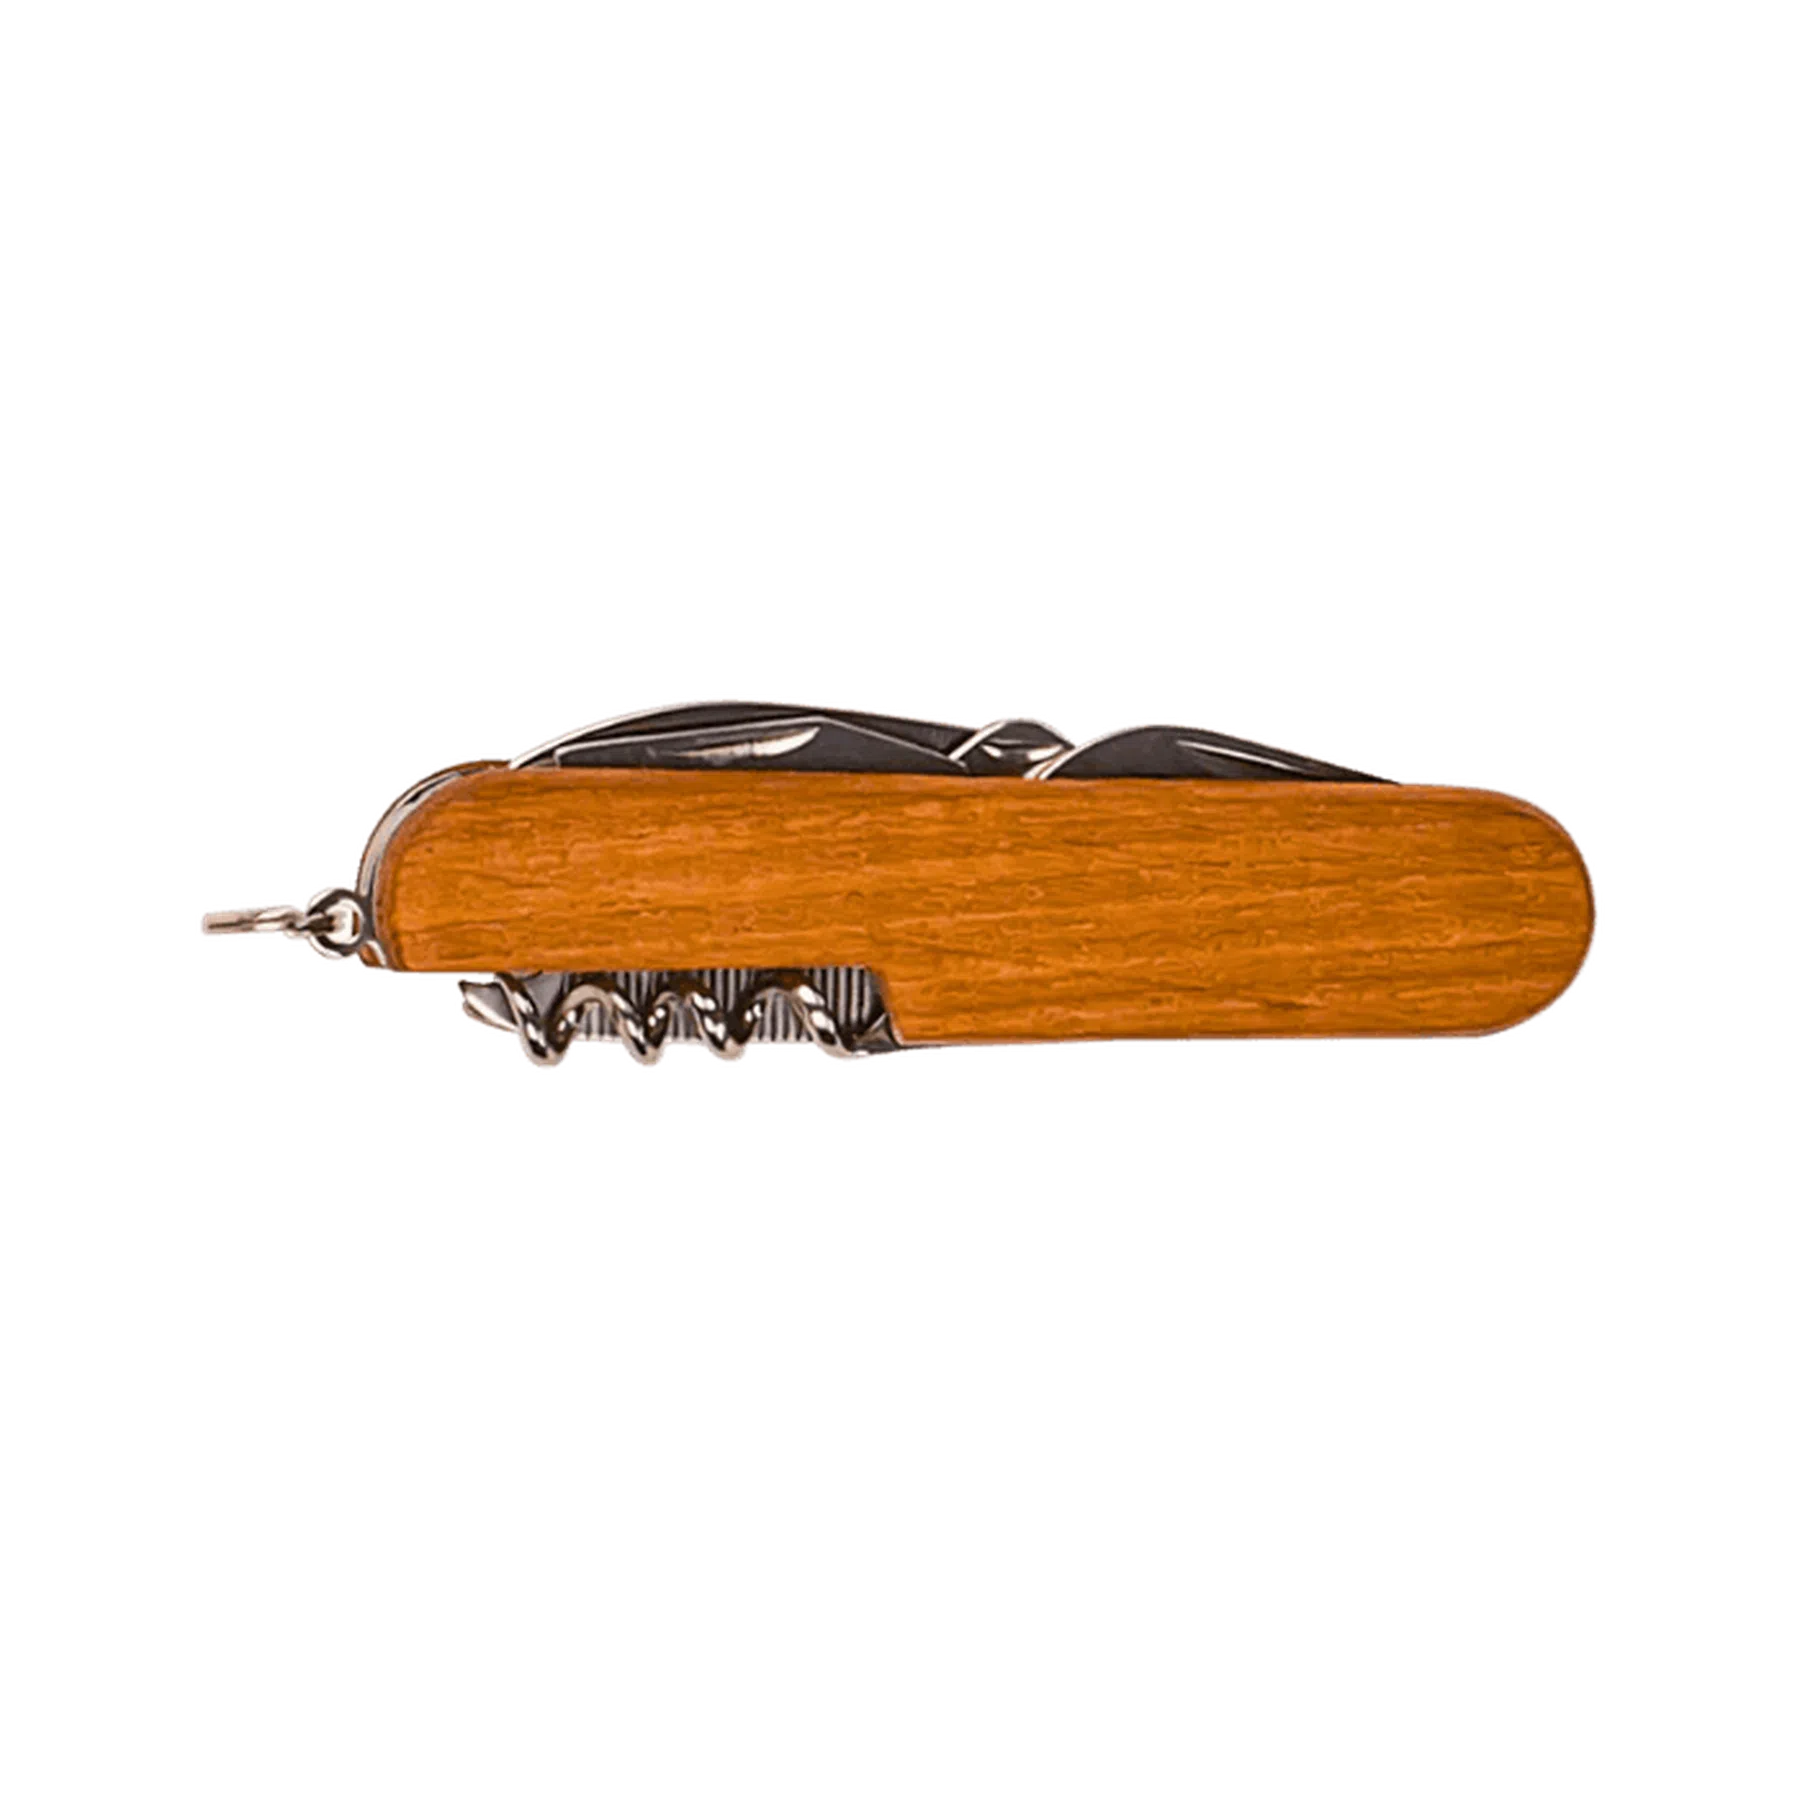 Personalized 8-Function Multi-Tool Pocket Knife